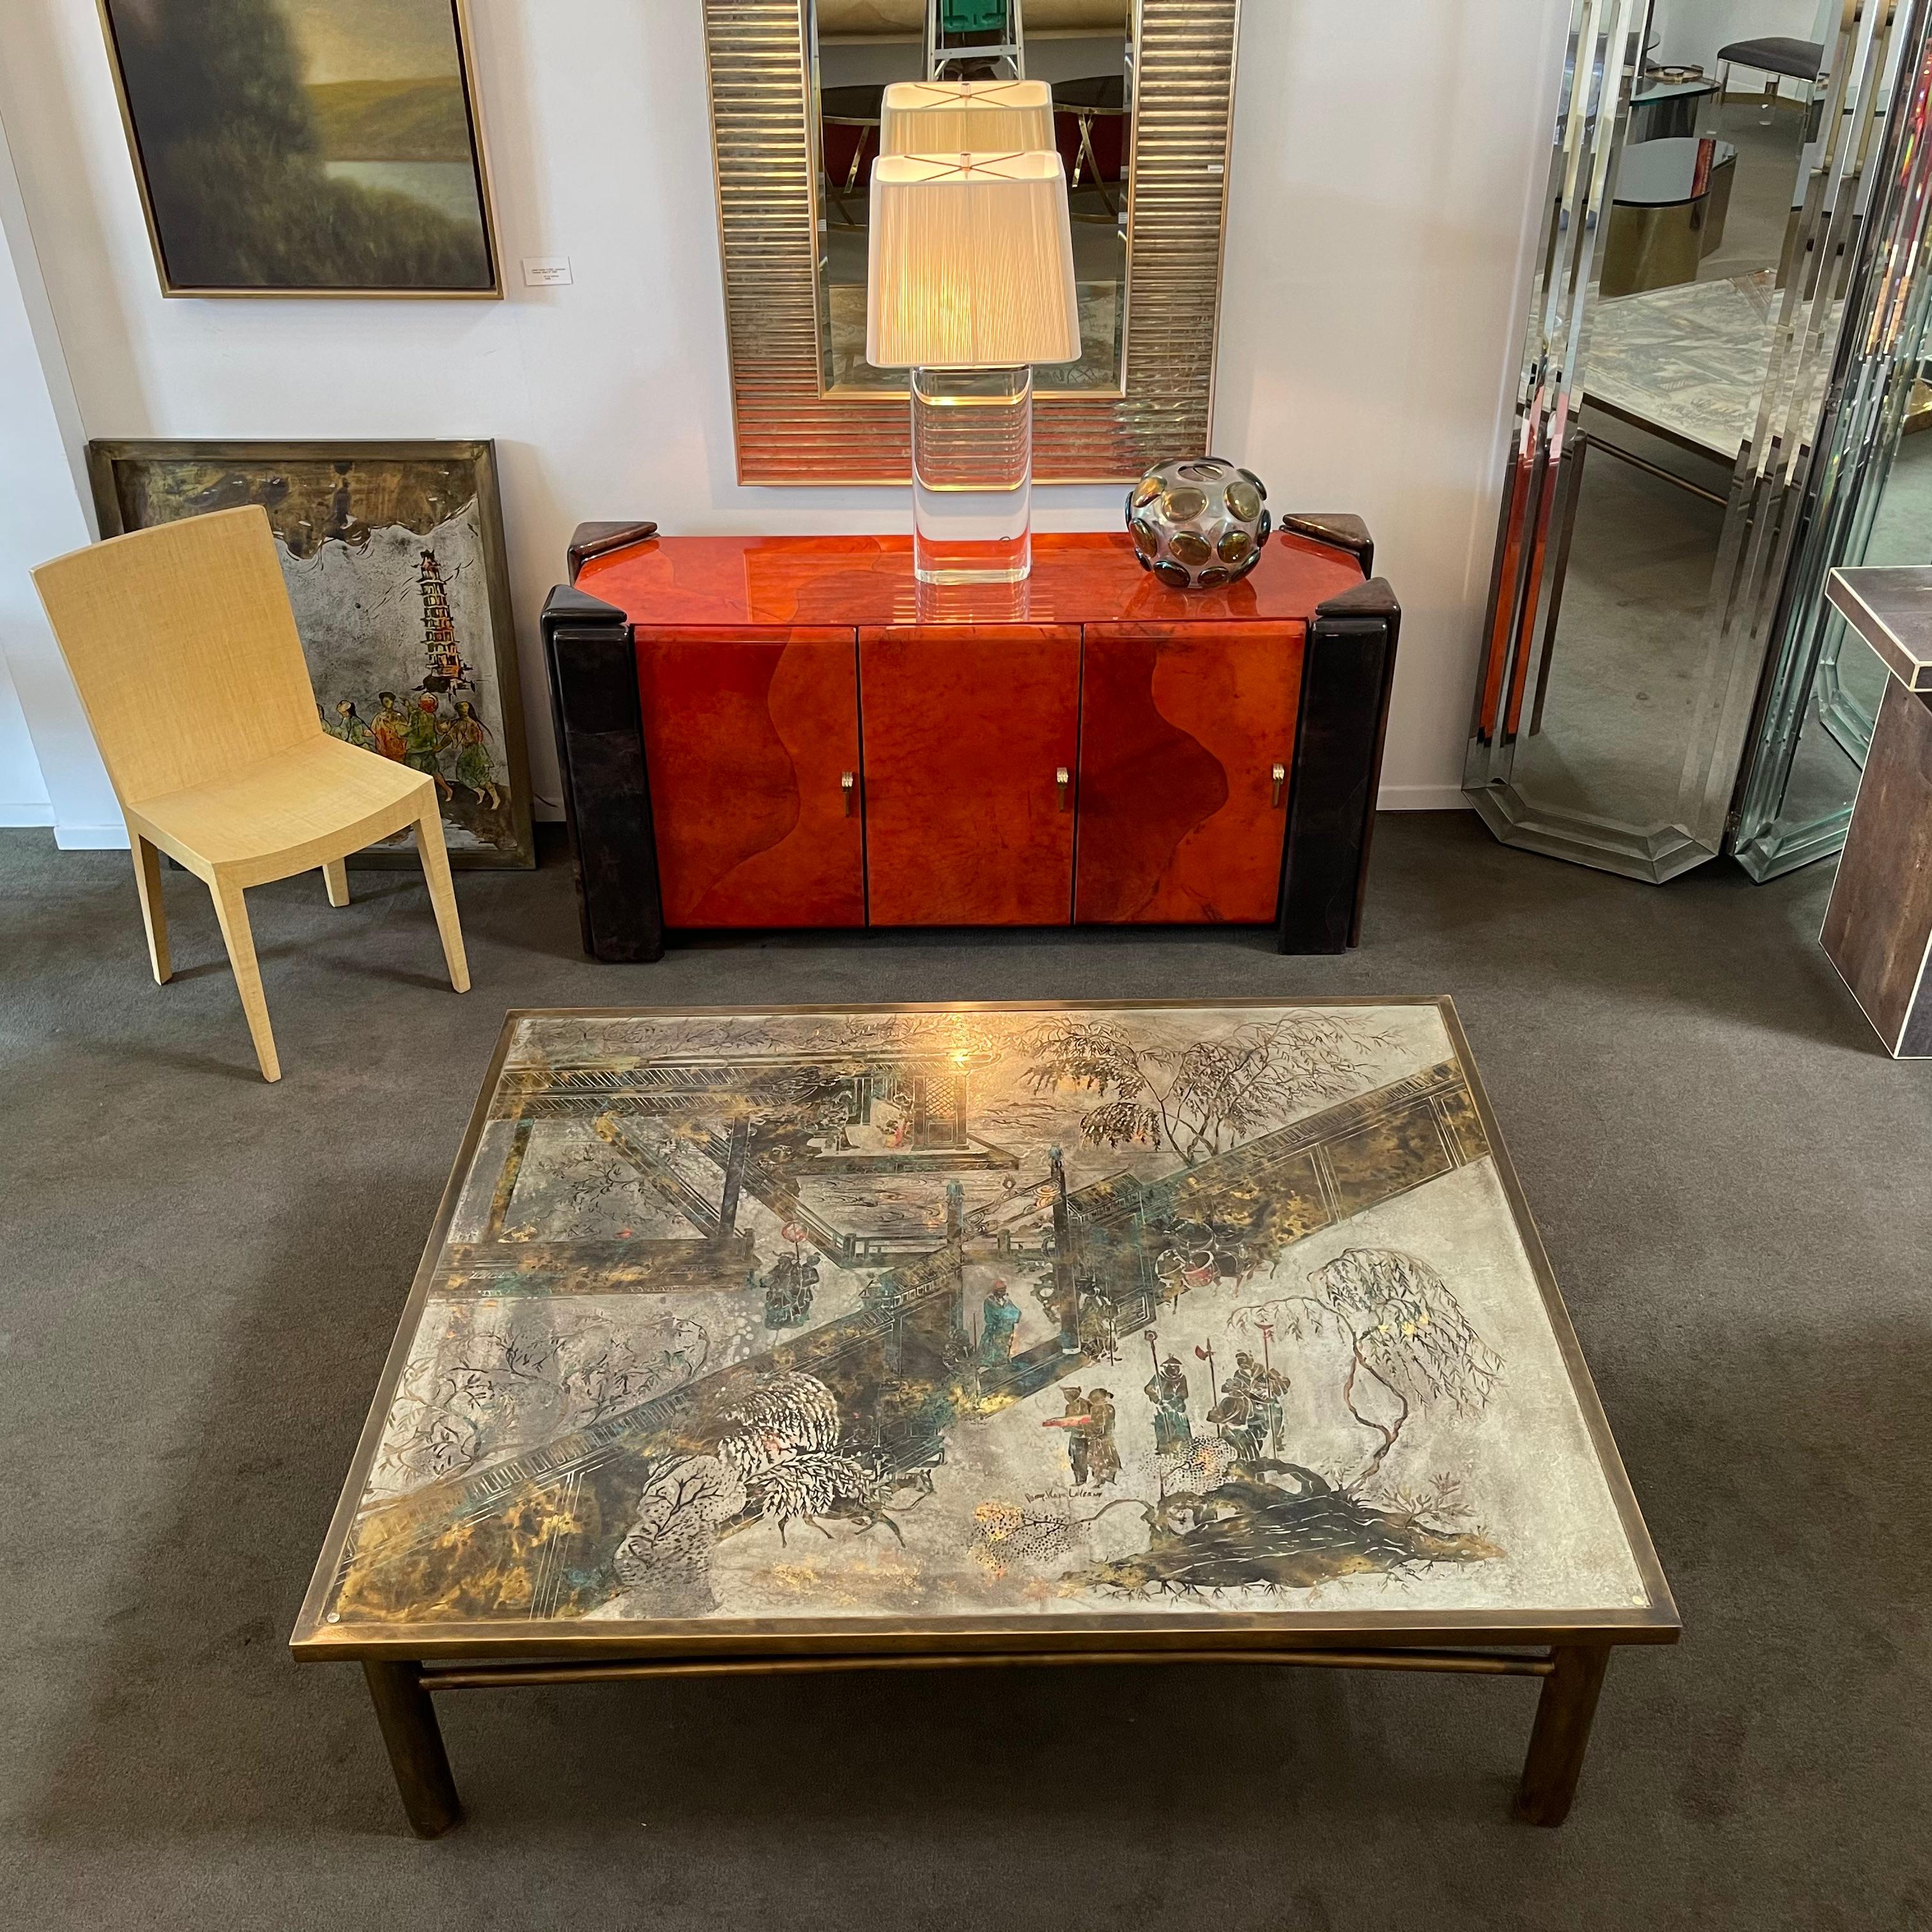 Signed, Philip and Kelvin LaVerne coffee table. Etched and patinated bronze with pewter overlay. Large size measuring four feet by five feet and seventeen inches high. This is a very good example of the father and son artisan's work. From New York